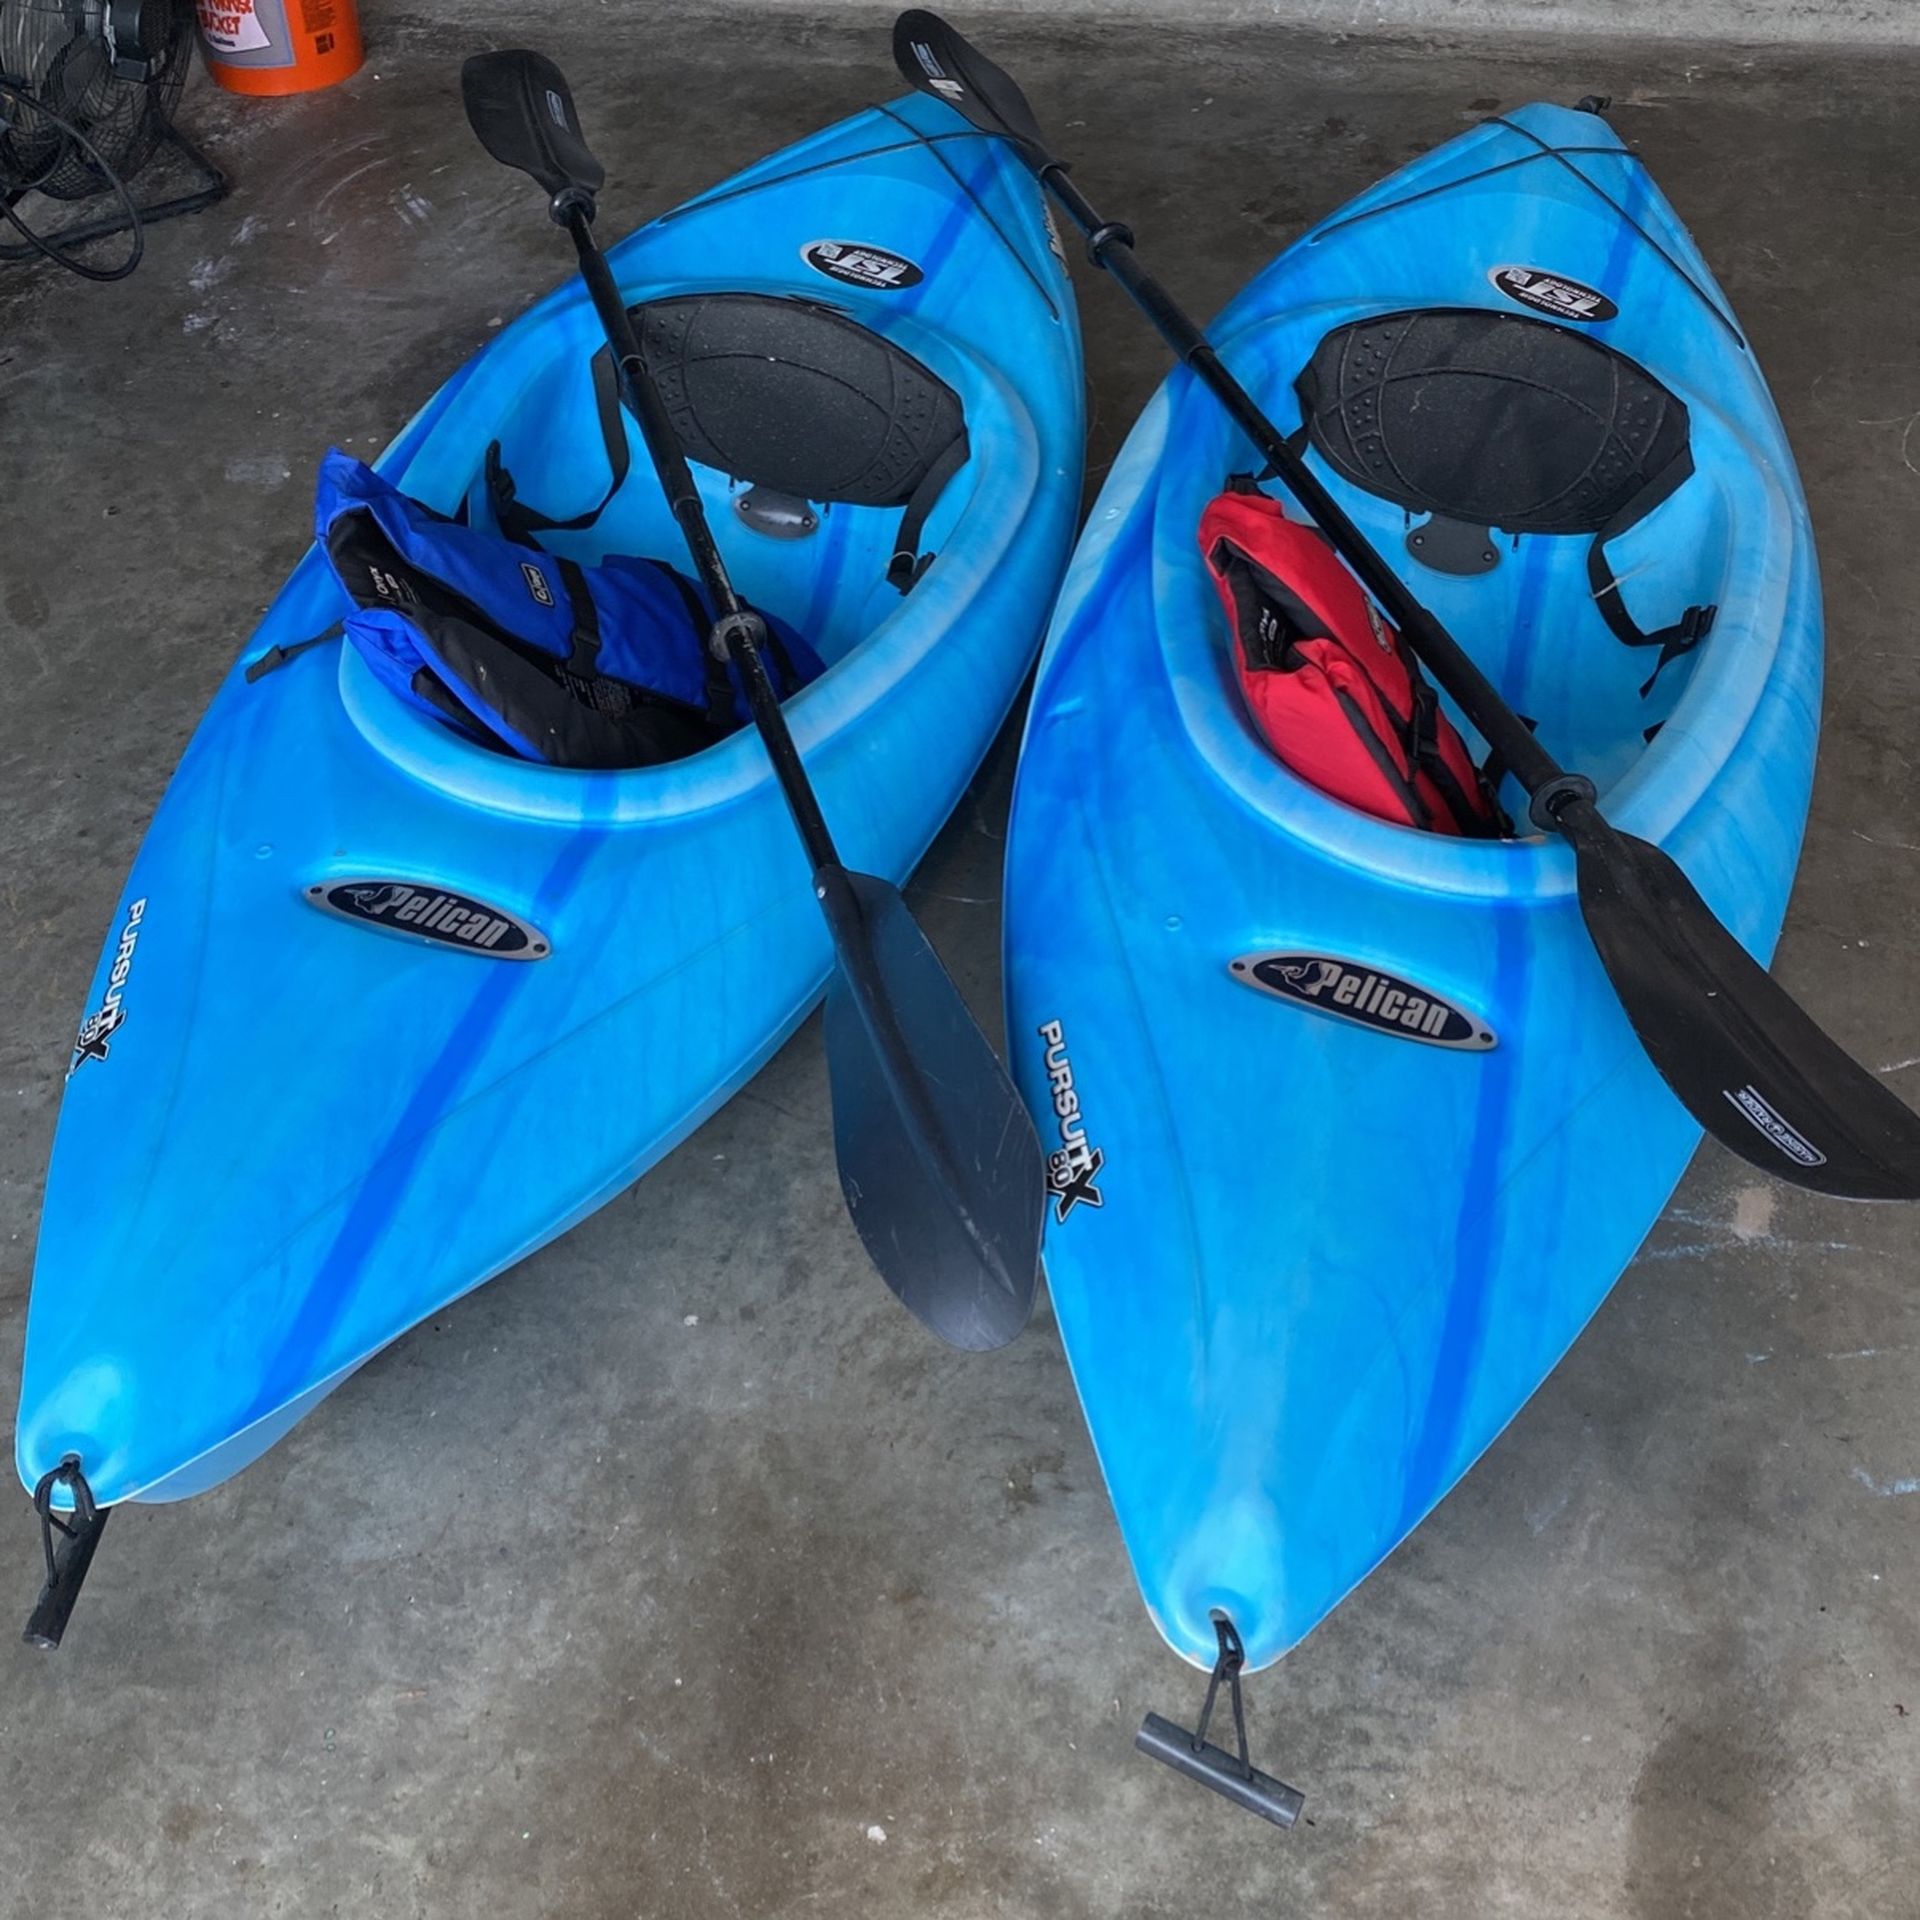 2 Kayaks with paddles and Lifejackets